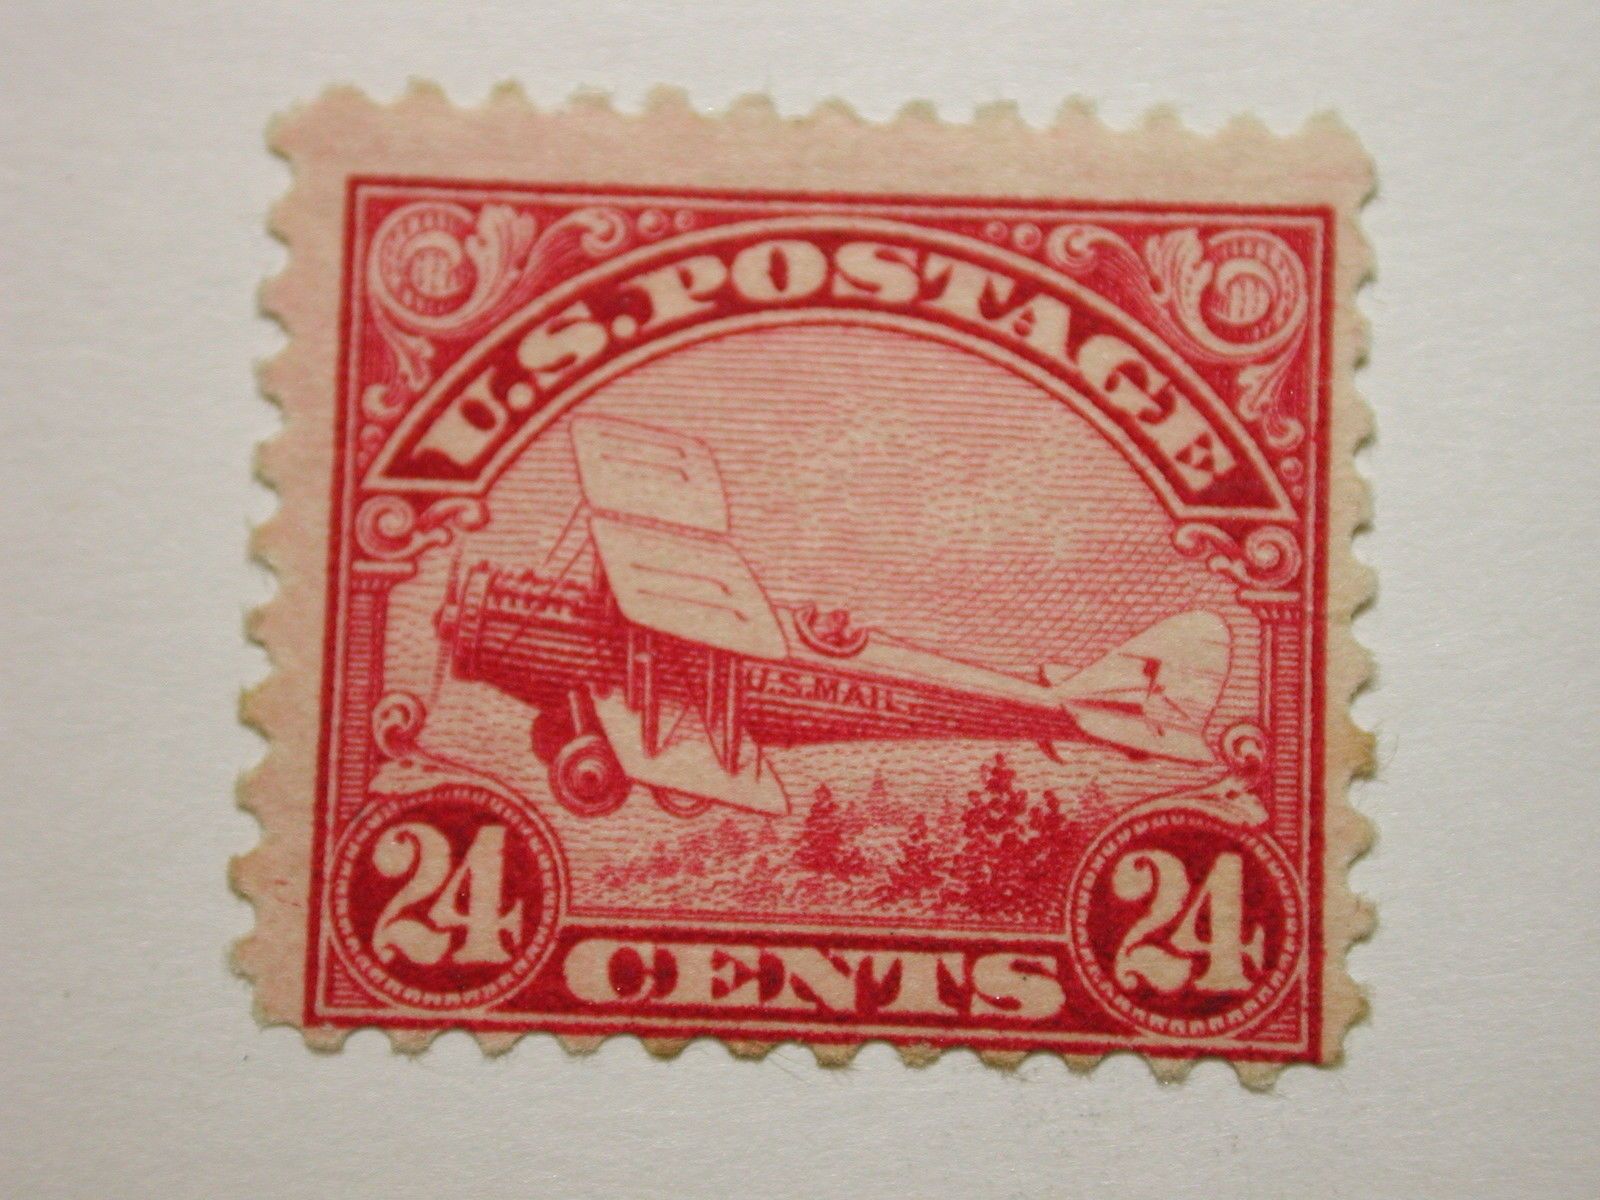 Travelstamps: US Stamps Scott #C4-C6 Air Mail Used, Ng, 8, 16 & 24 cent